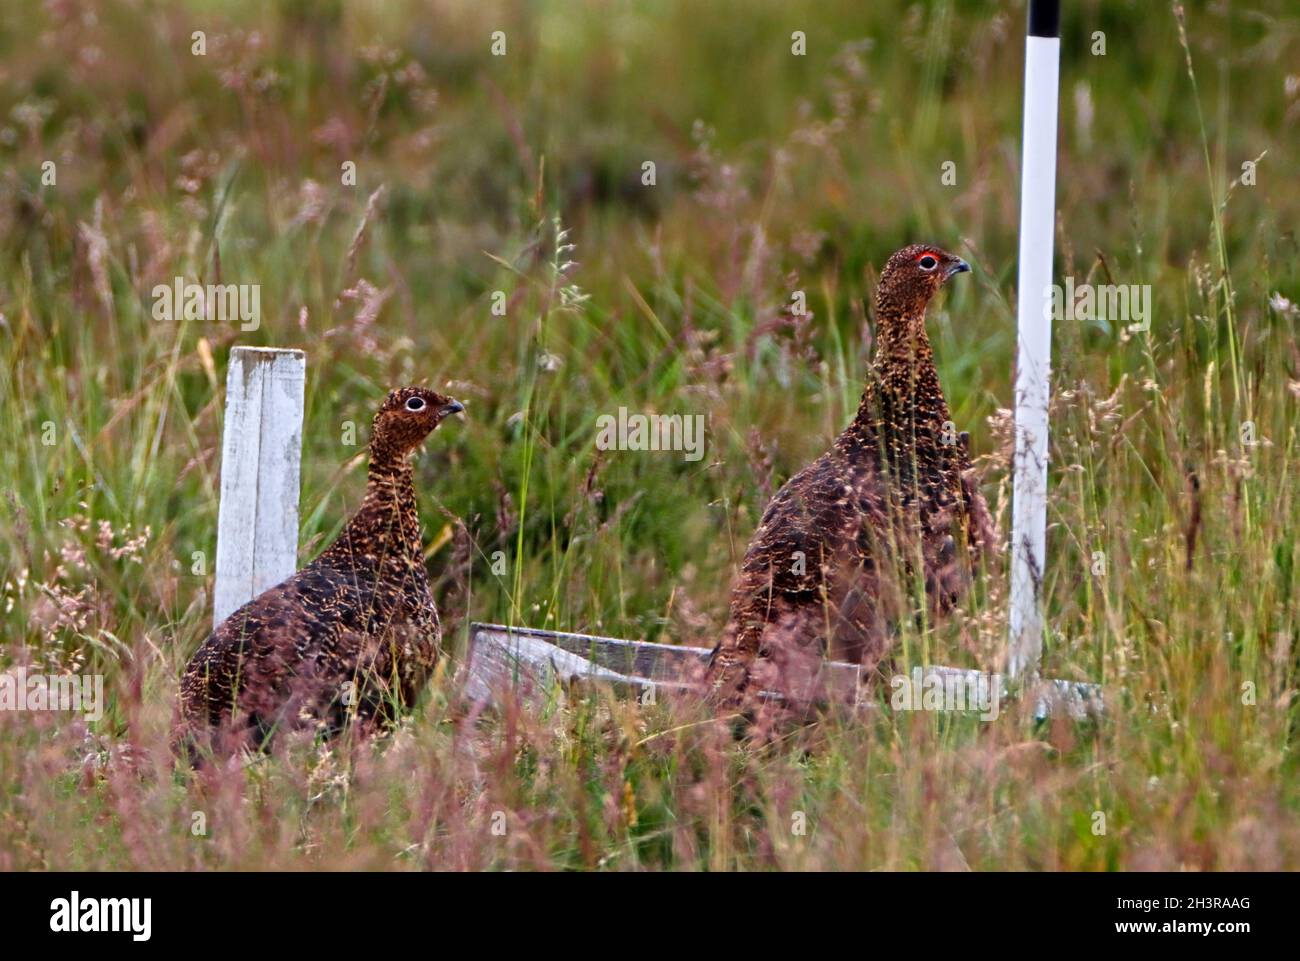 RED GROUSE (Lagopus lagopus scoticus) visit a grit tray on heather moorland, Scotland, UK. Stock Photo